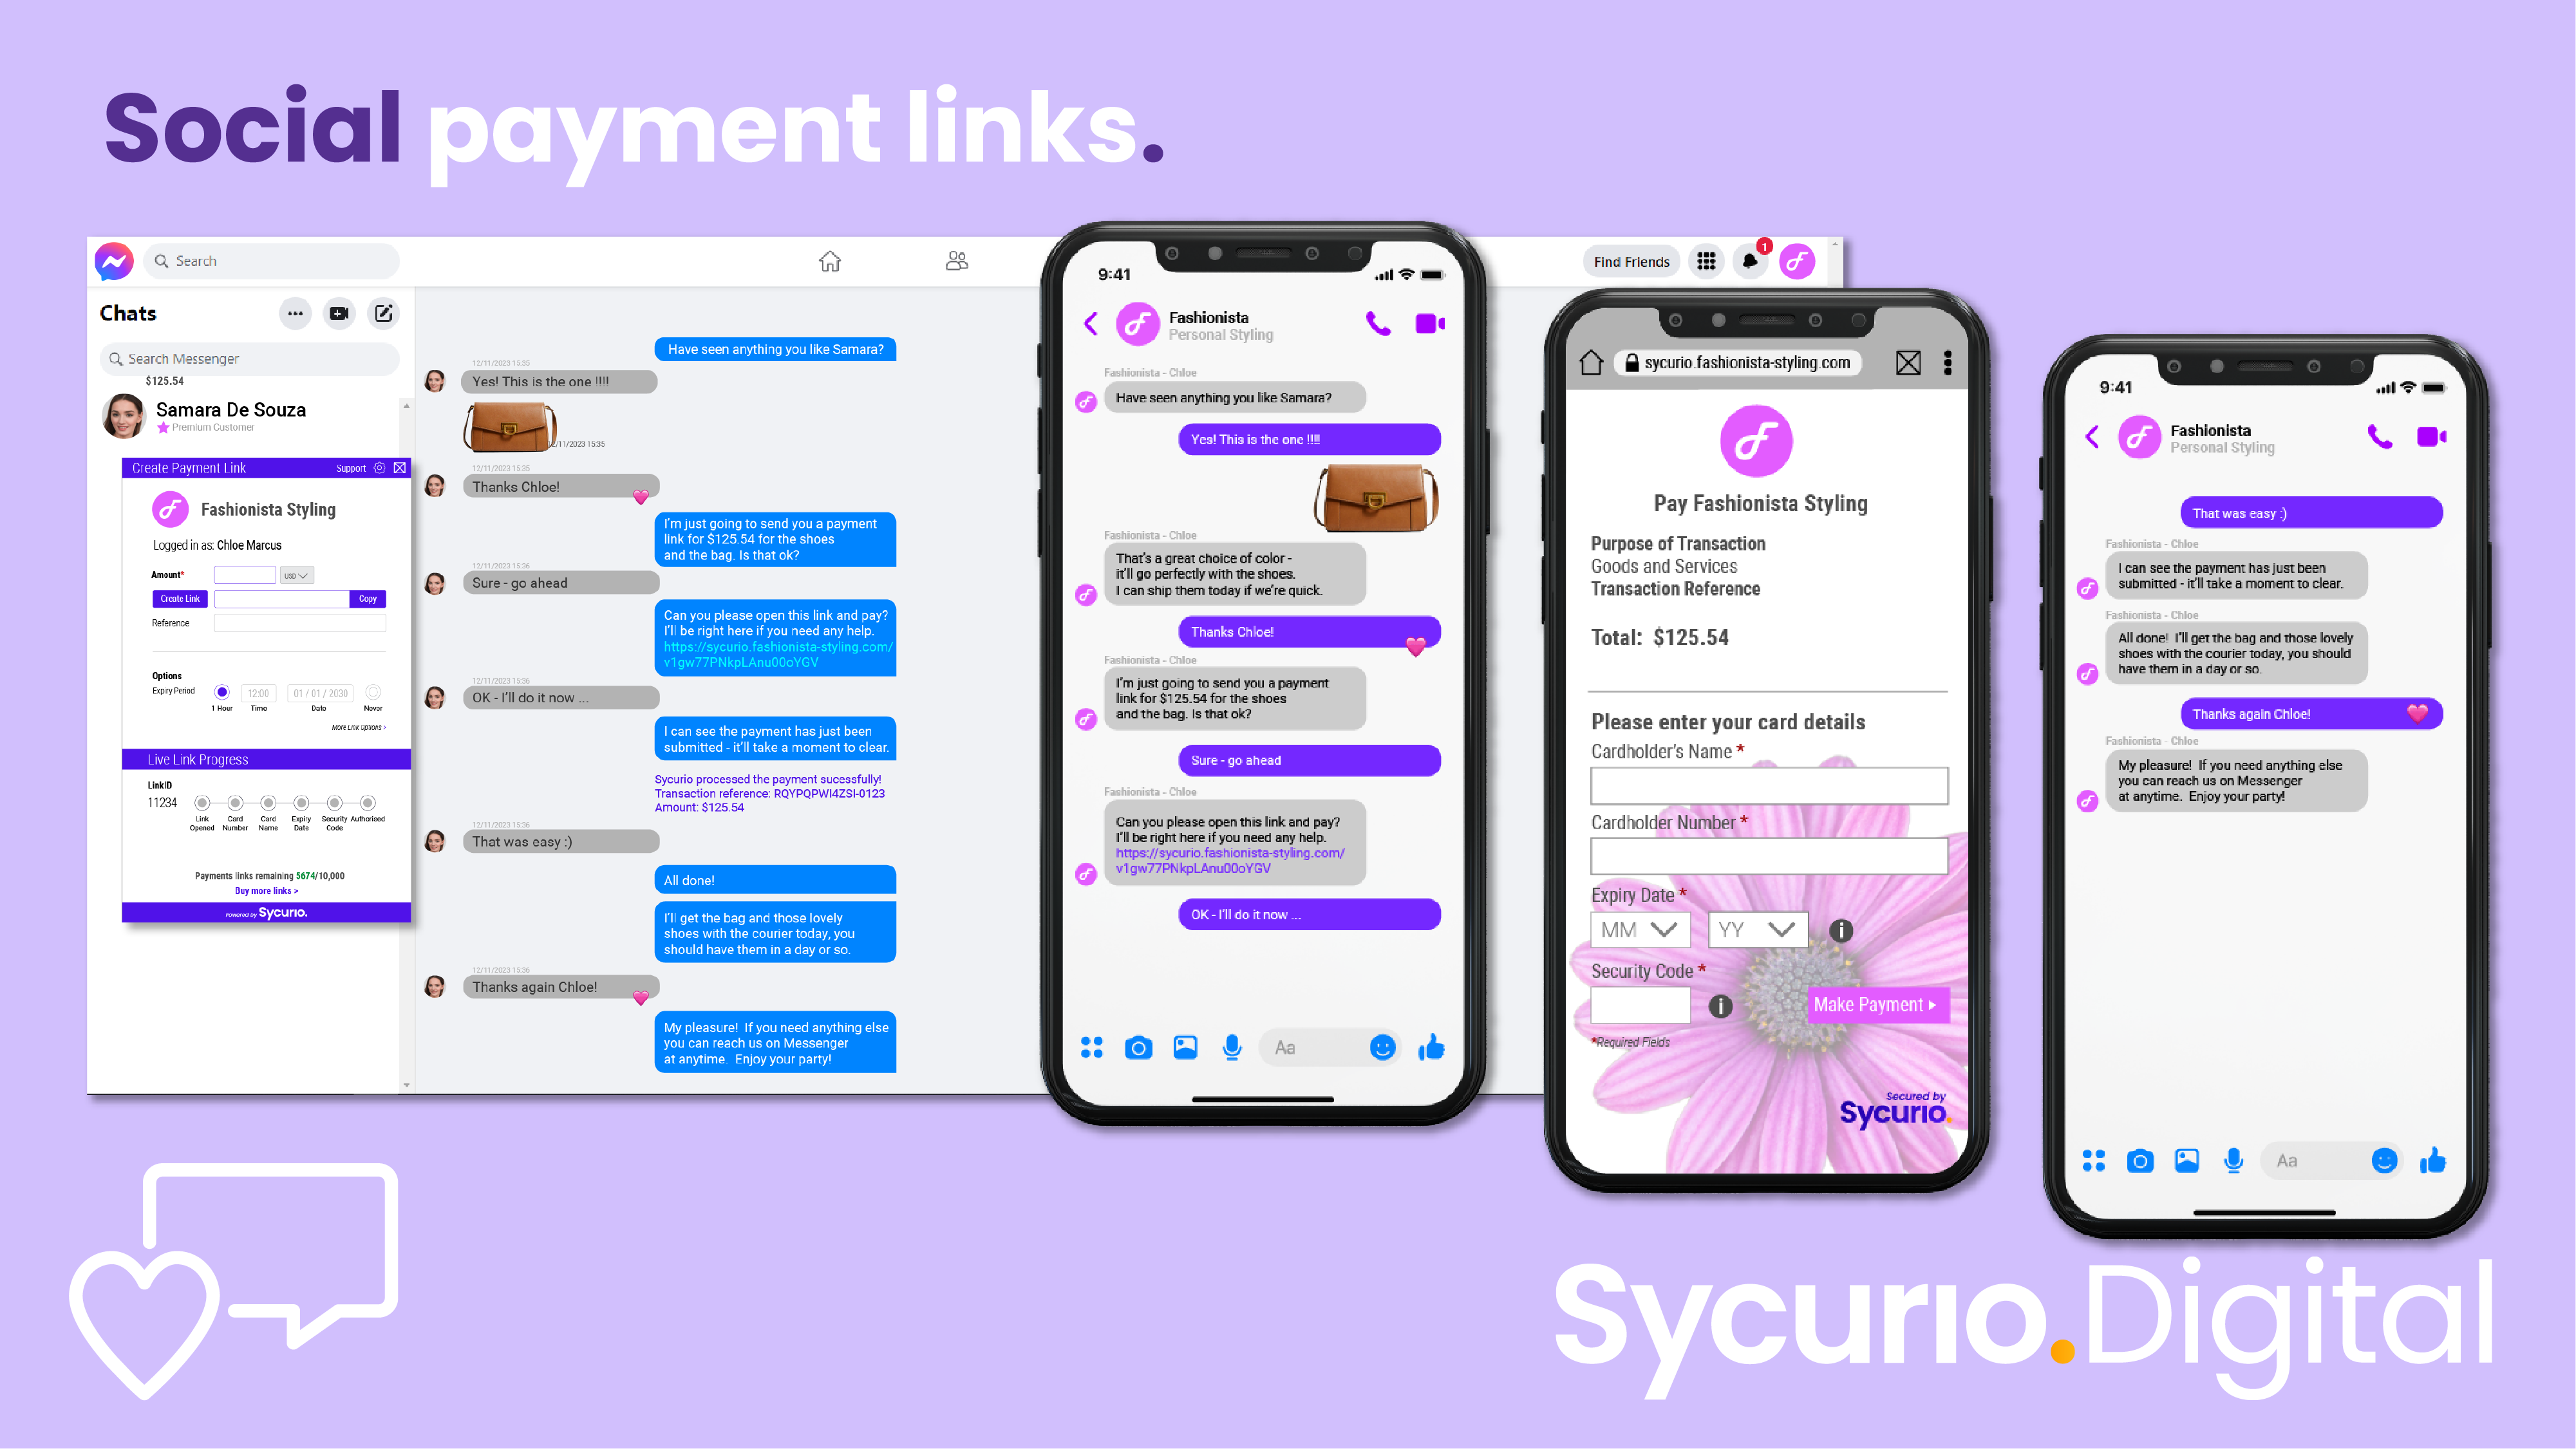 Sycurio.Digital Omnichannel Payment Links social payment links